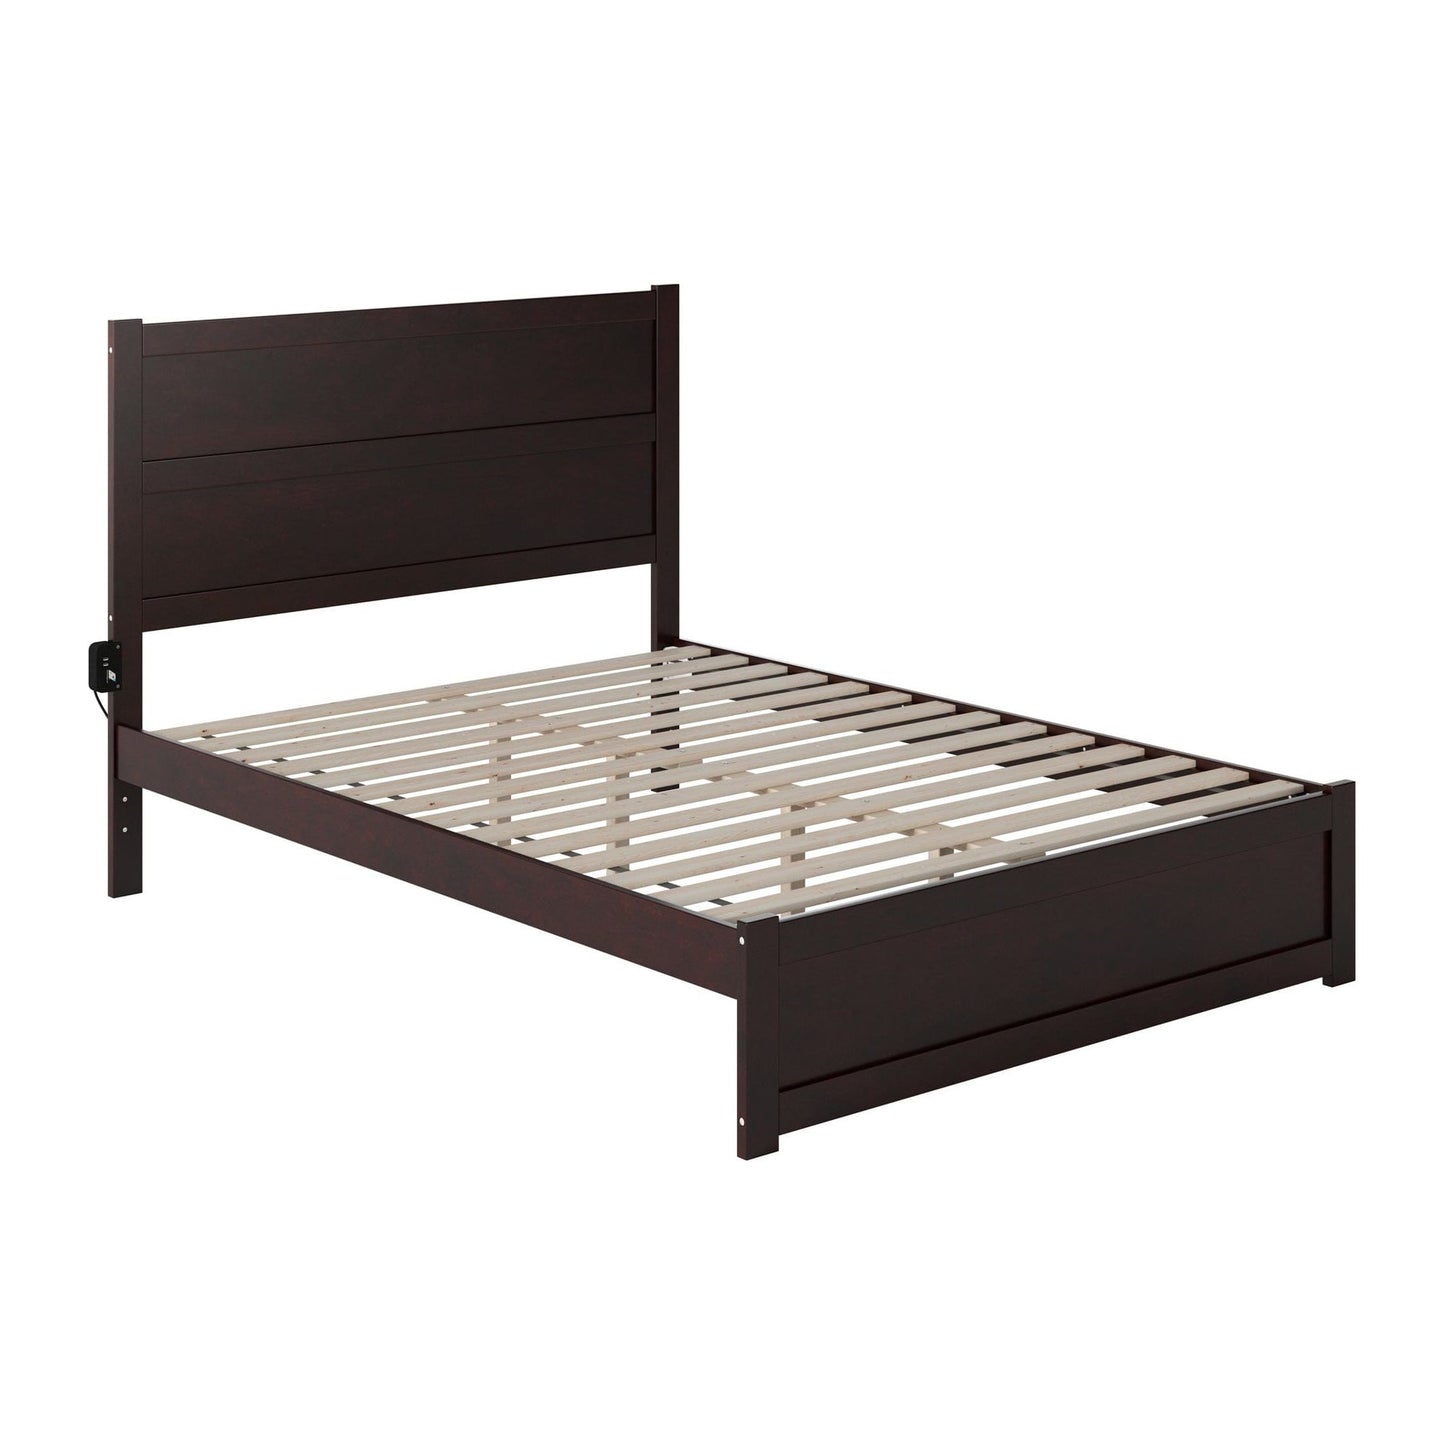 AFI Furnishings NoHo Queen Bed with Footboard in Espresso AG9160041